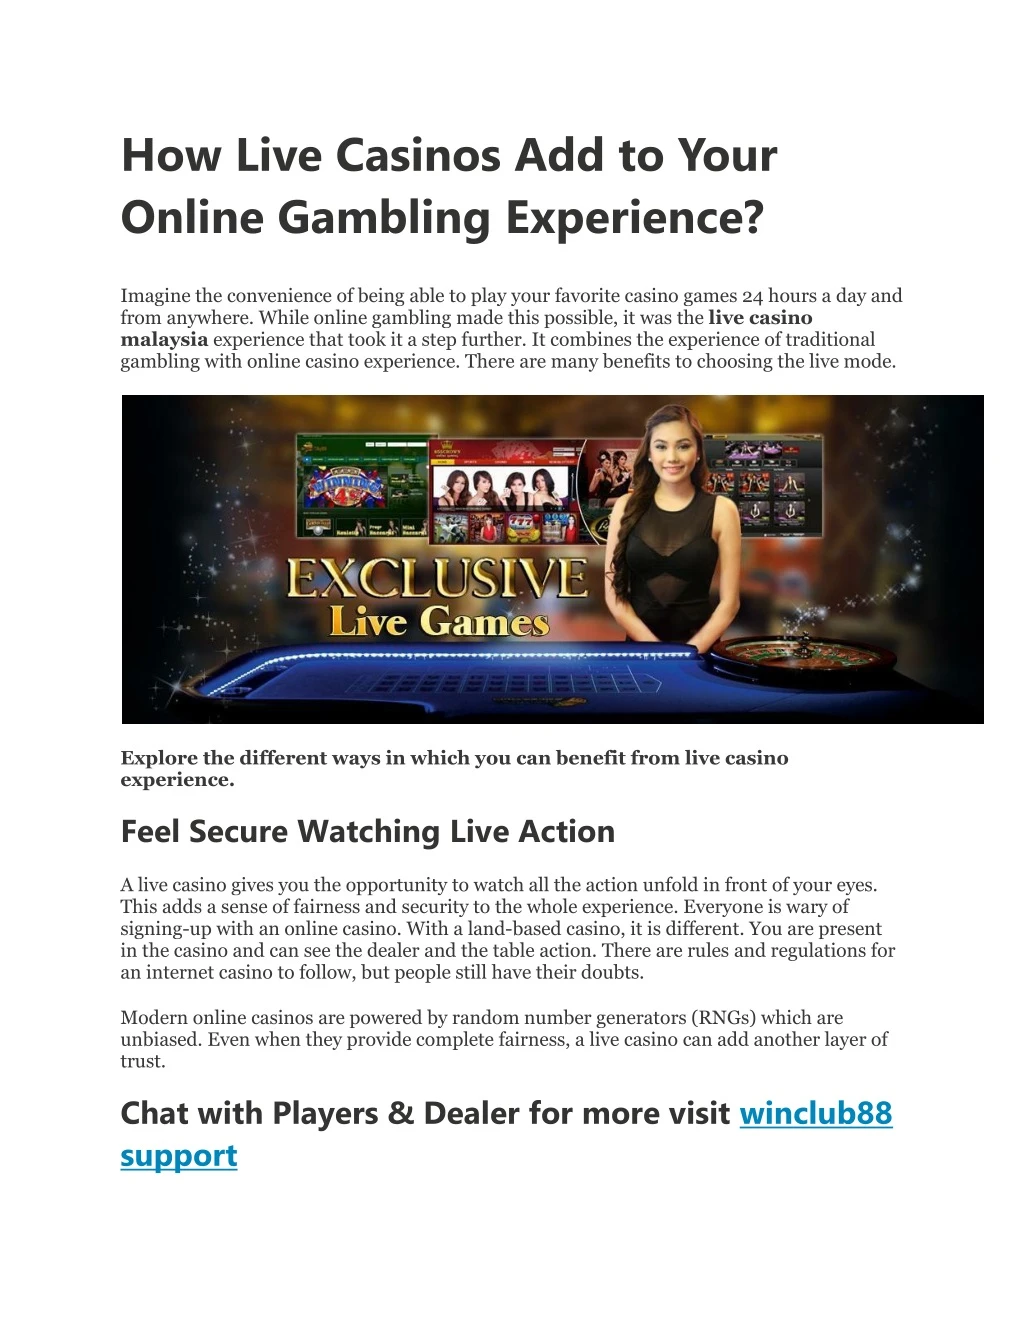 how live casinos add to your online gambling